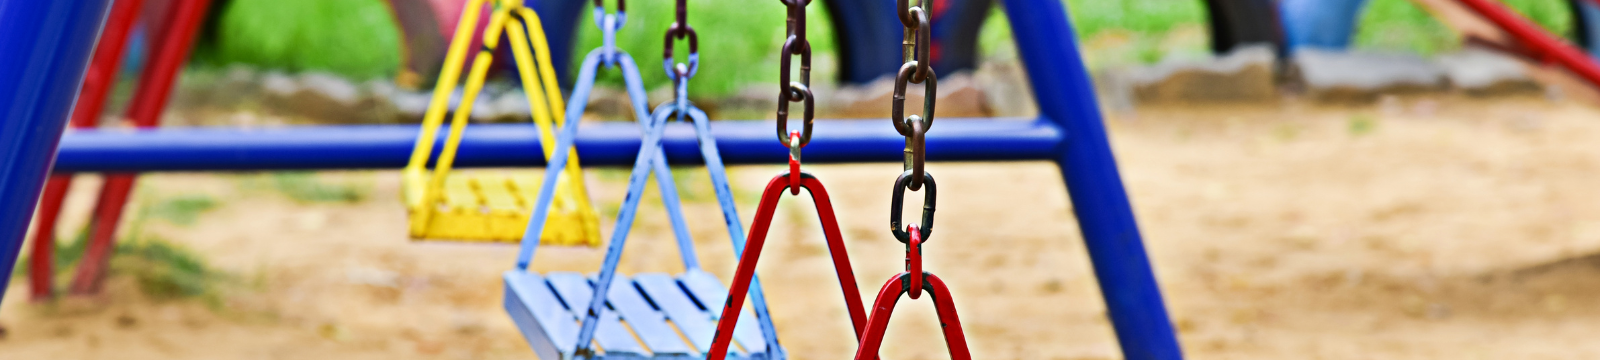 swings at a playground